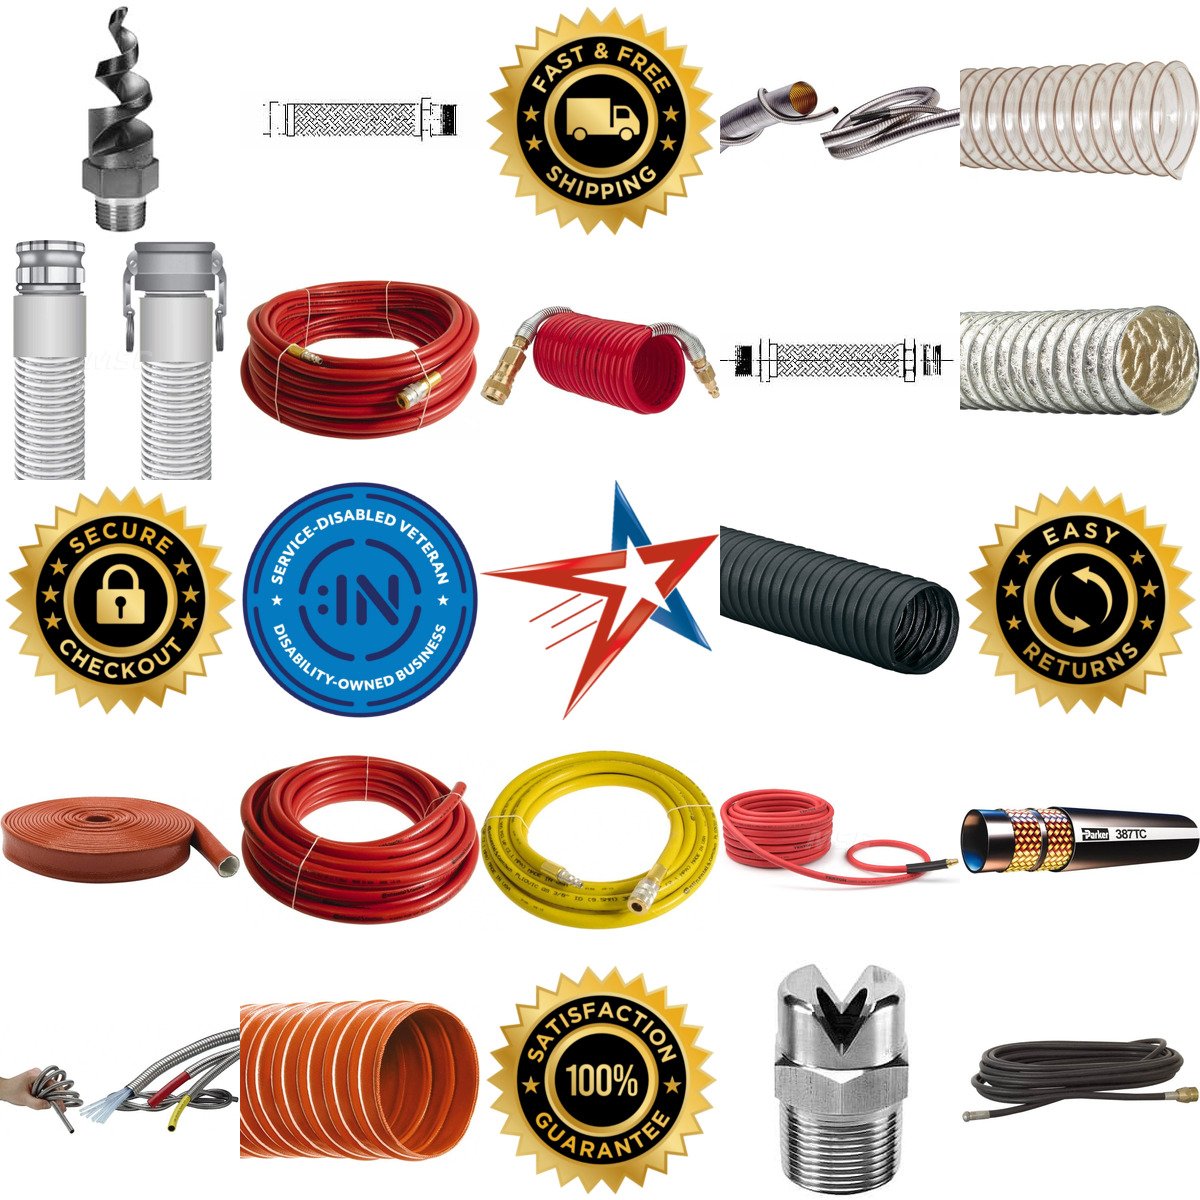 A selection of Hose products on GoVets